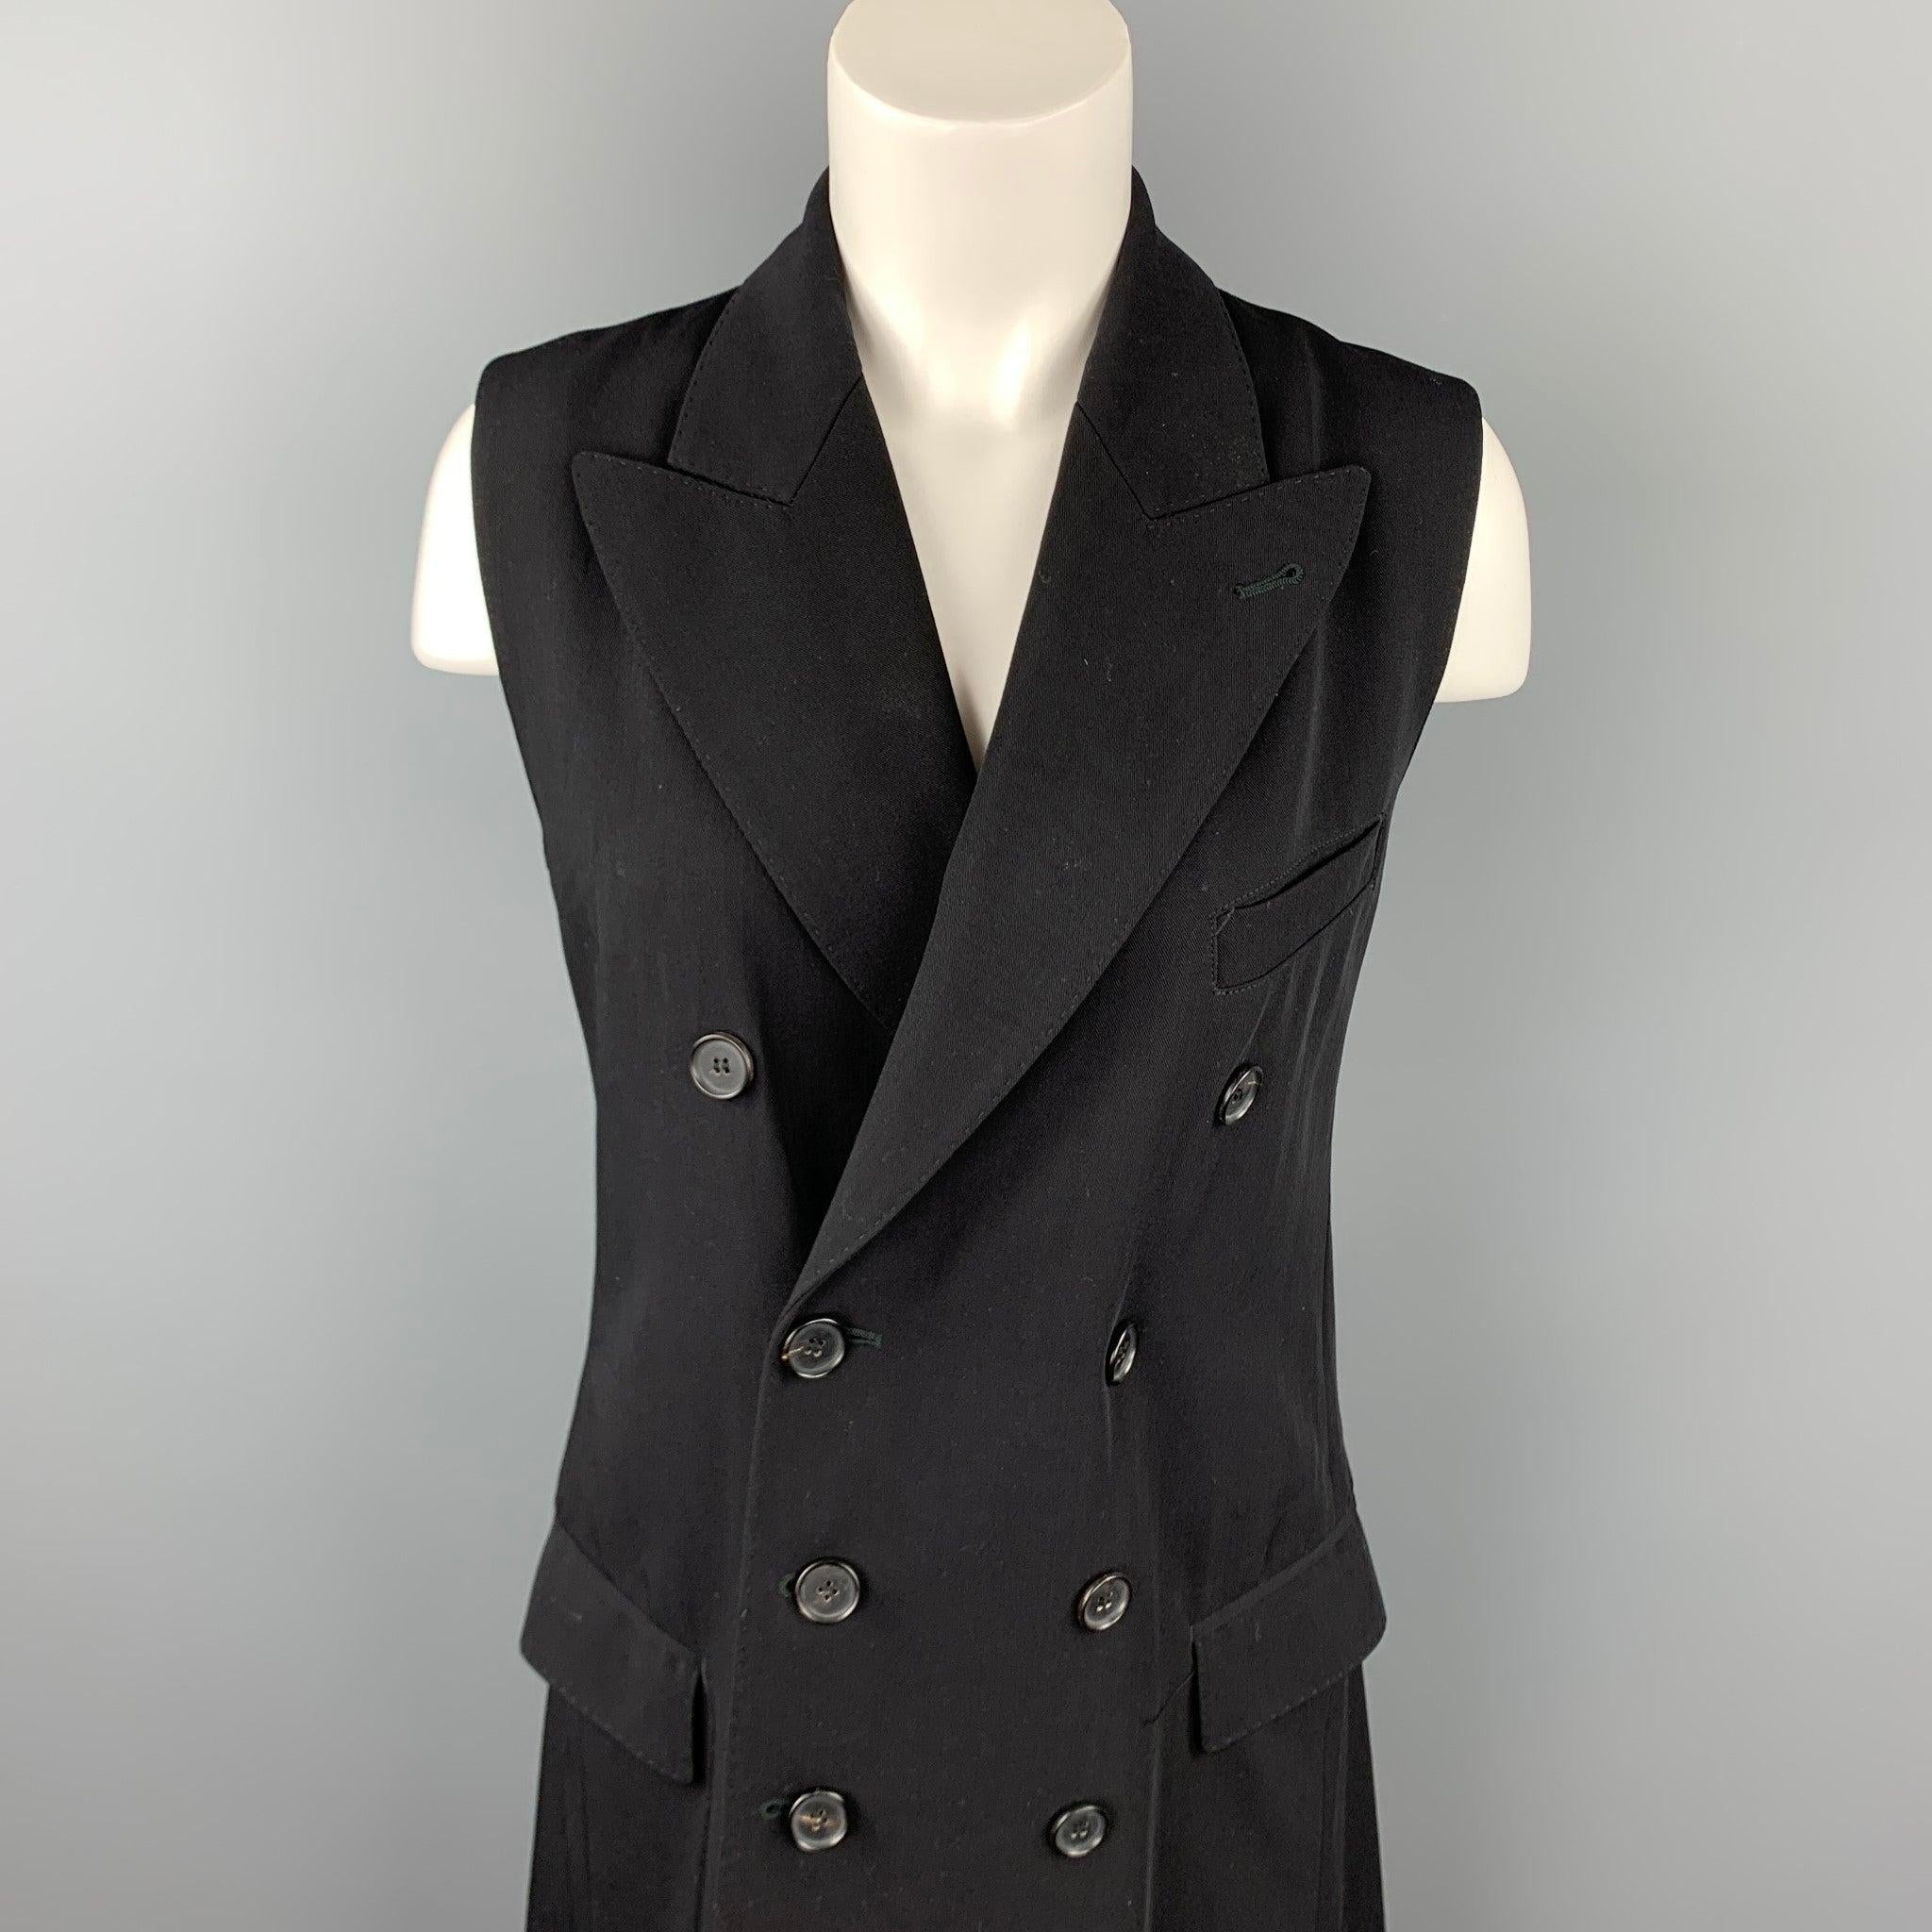 Vintage JEAN PAUL GAULTIER vest comes in a black wool blend with a full animal print liner featuring a peak lapel, sleeveless, flap pockets, and a double breasted closure. Made in Italy.Very Good
Pre-Owned Condition. 

Marked:   No size marked